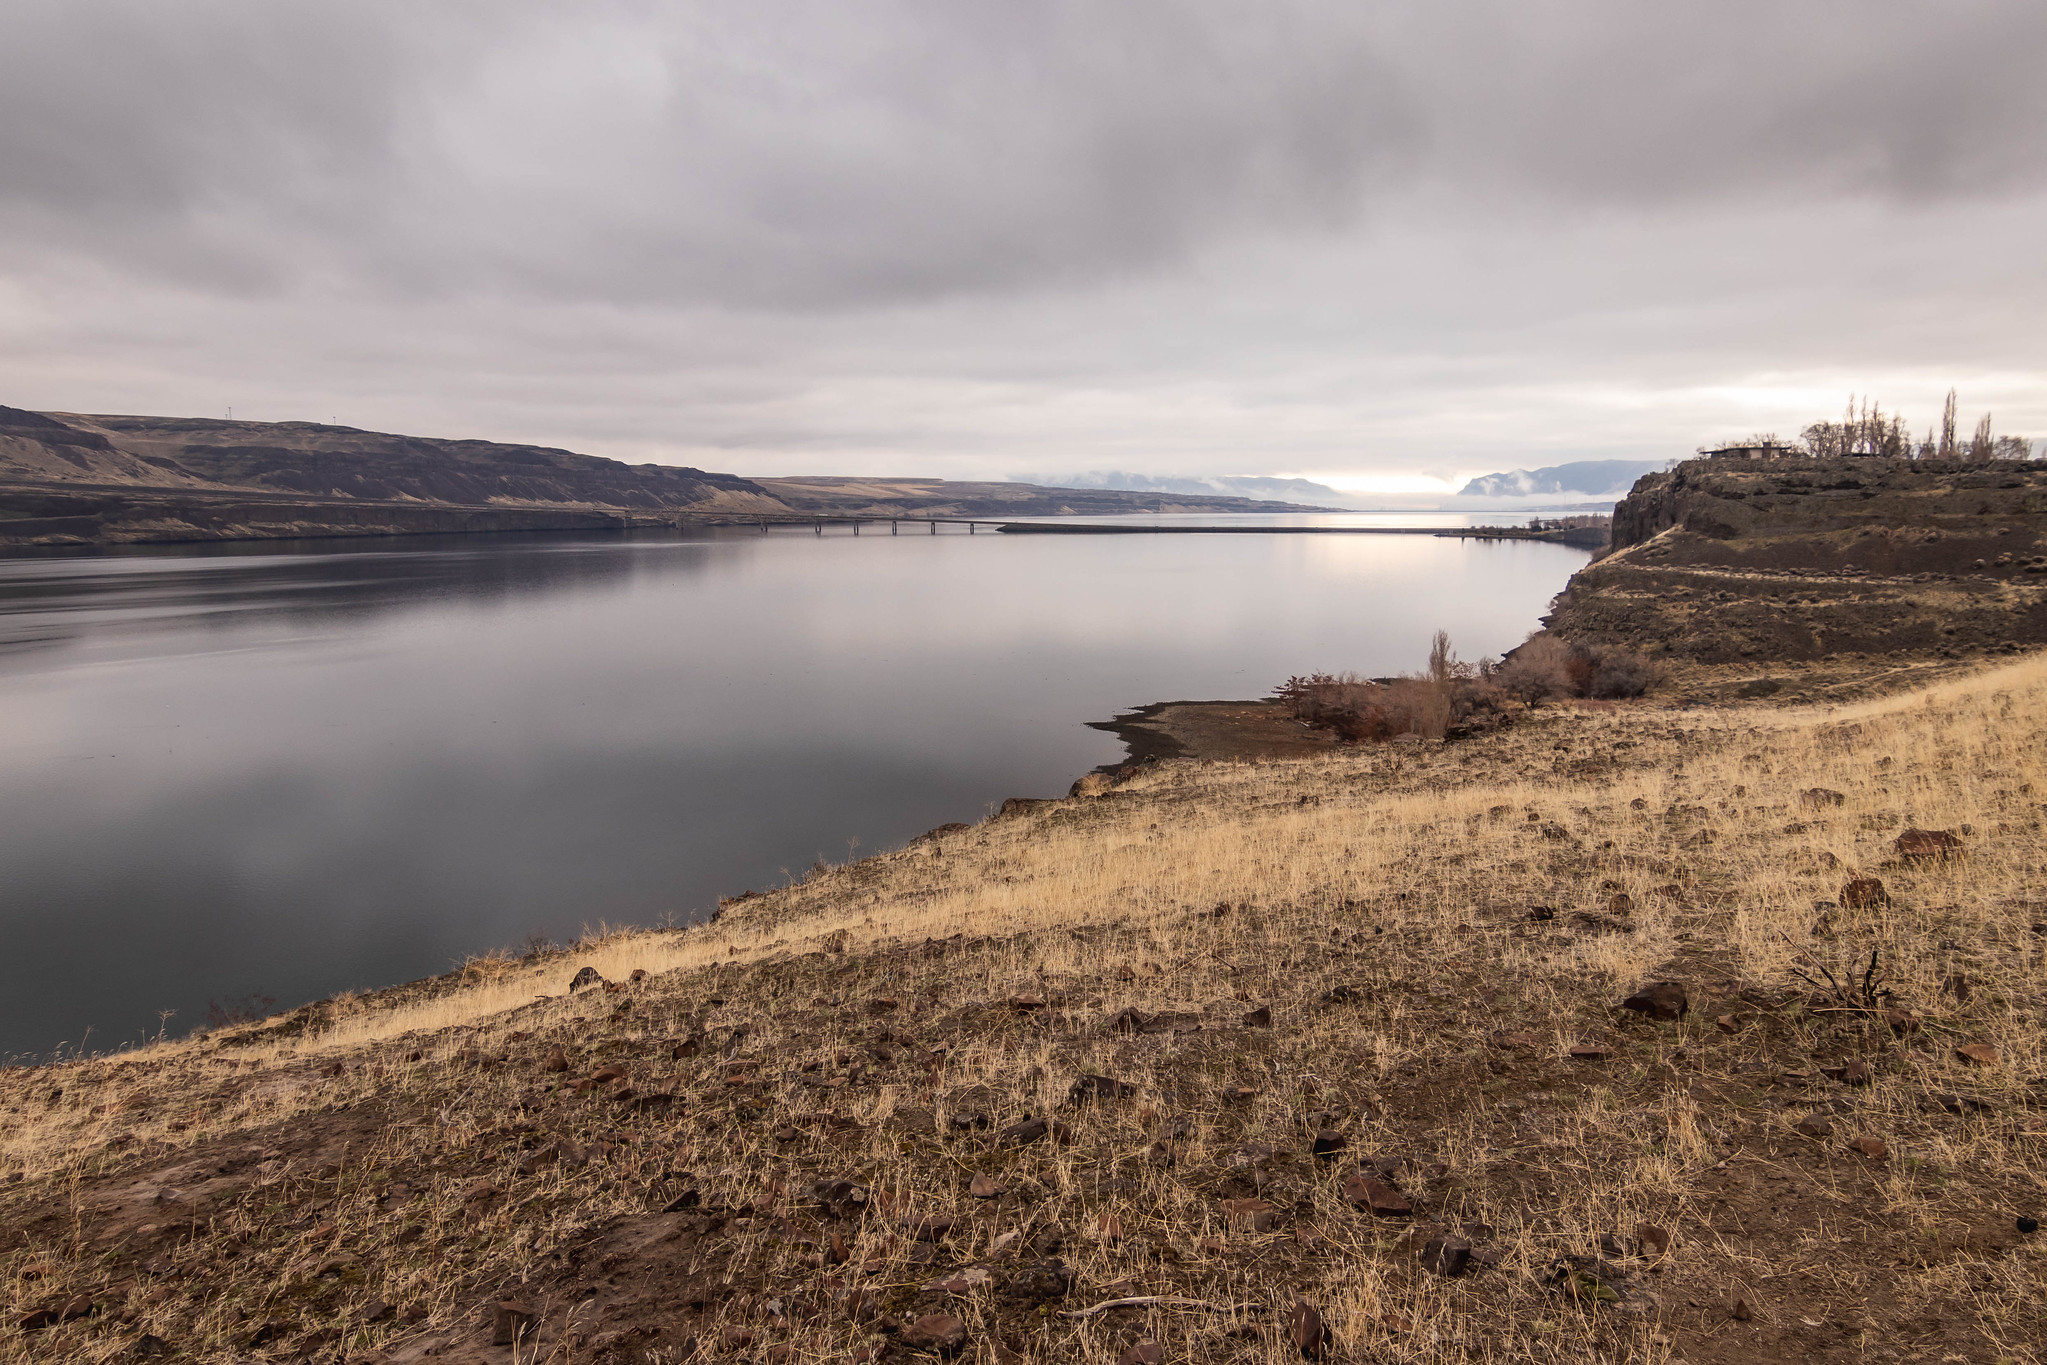 Columbia River view